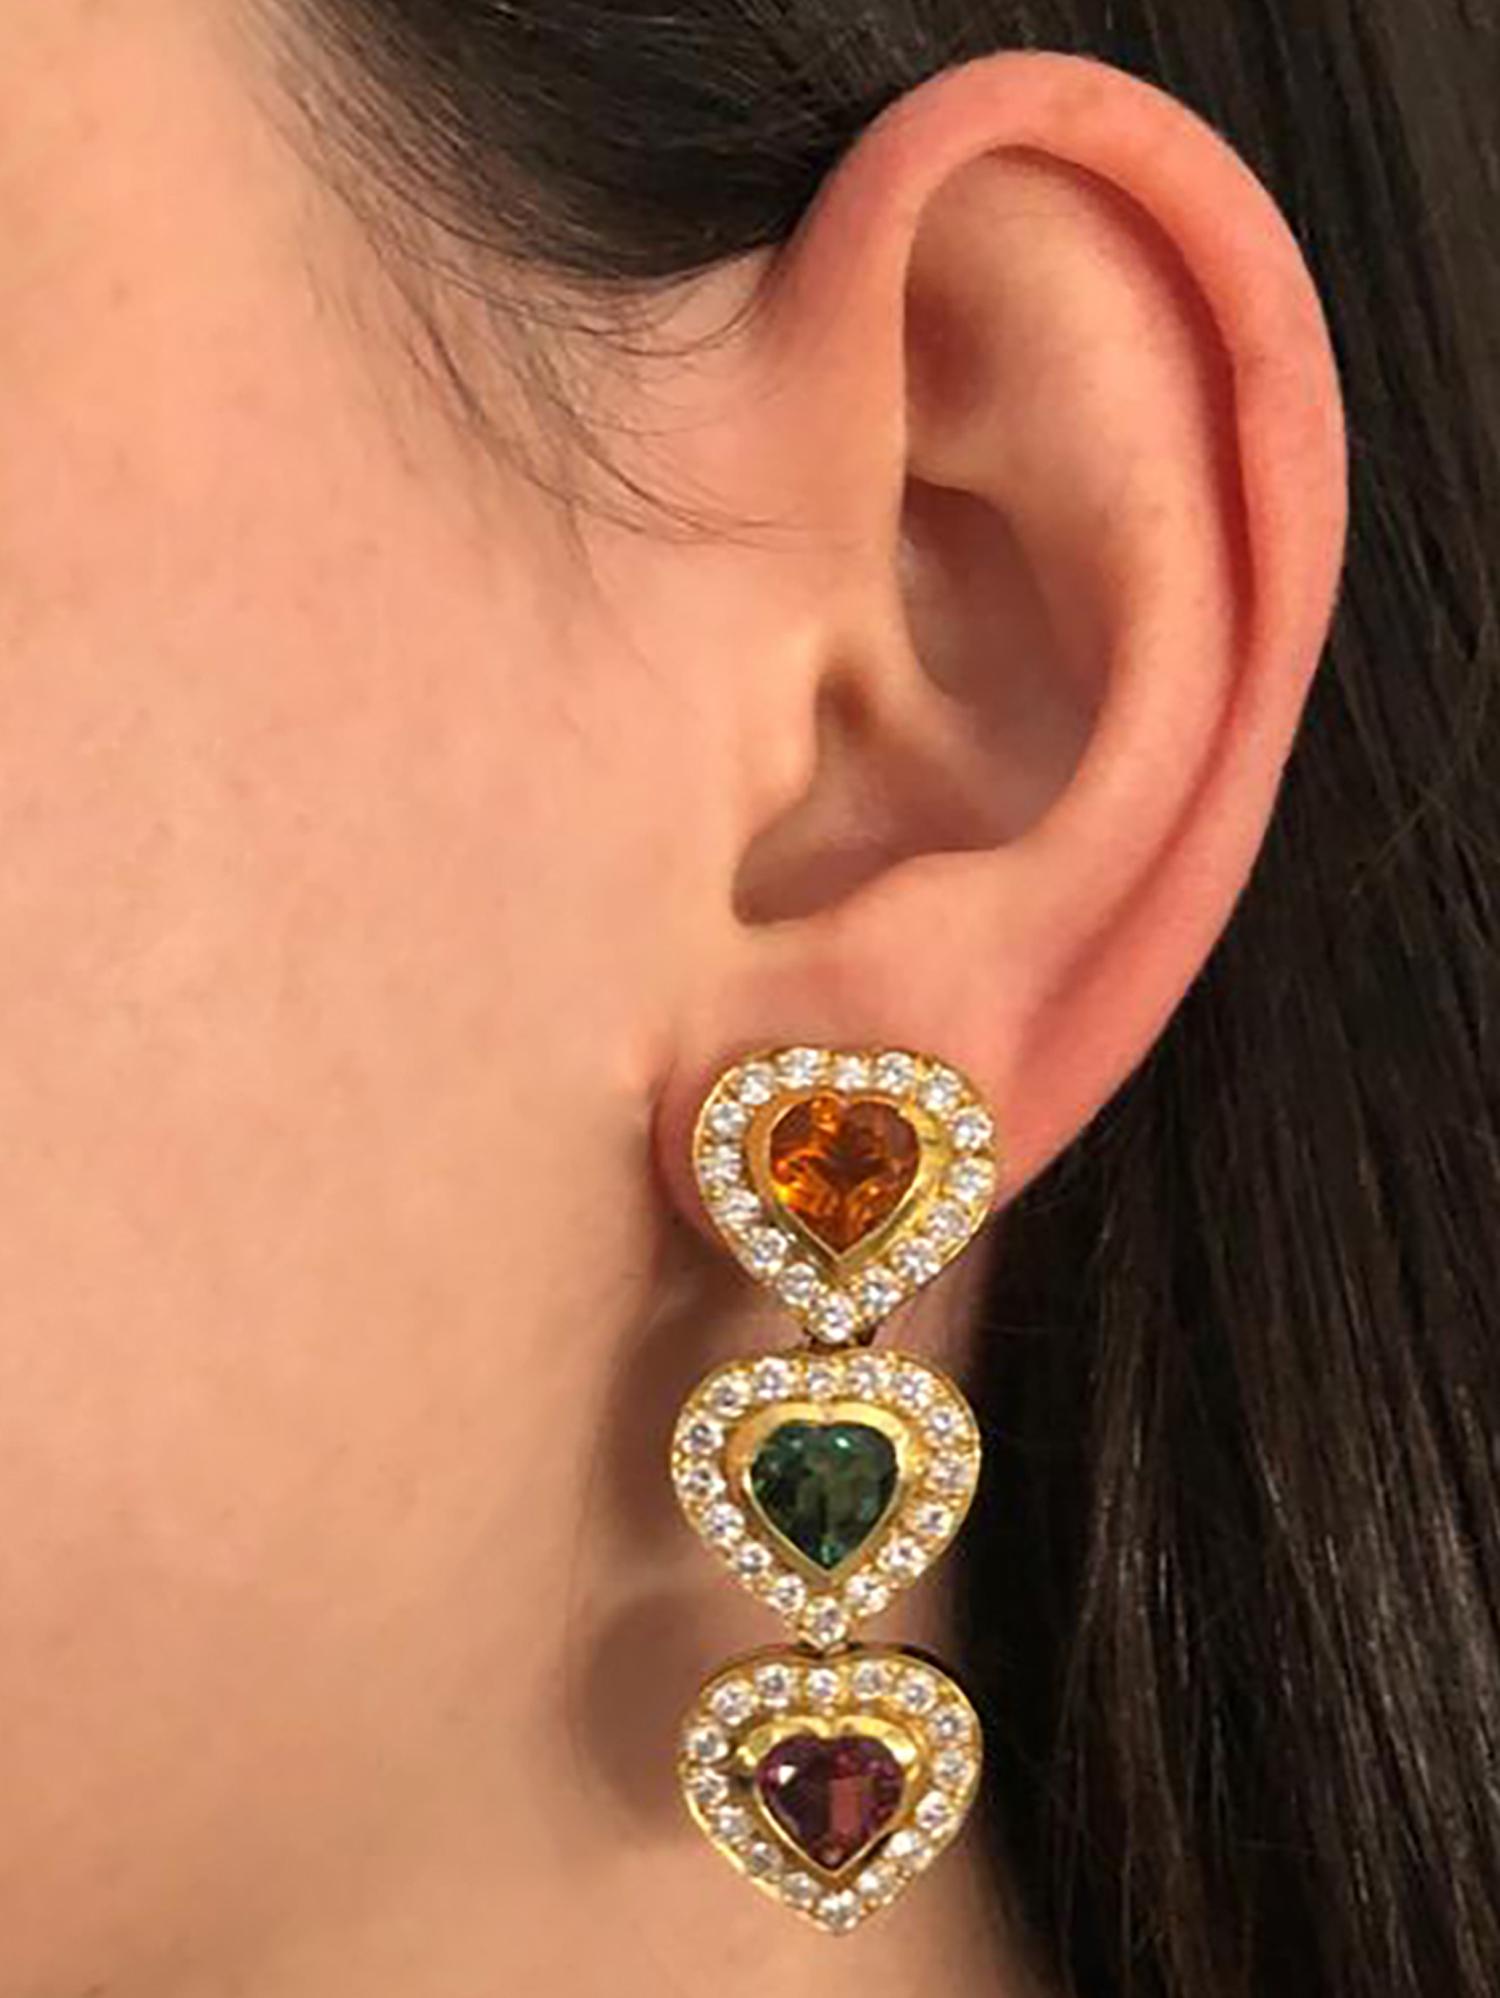 Enchanting dangle earrings crafted in 18 karat yellow gold, featuring two citrine hearts weighing approximately 4 carats total, two rubellite tourmaline hearts weighing approximately 4 carats total, and two green tourmaline hearts weighing